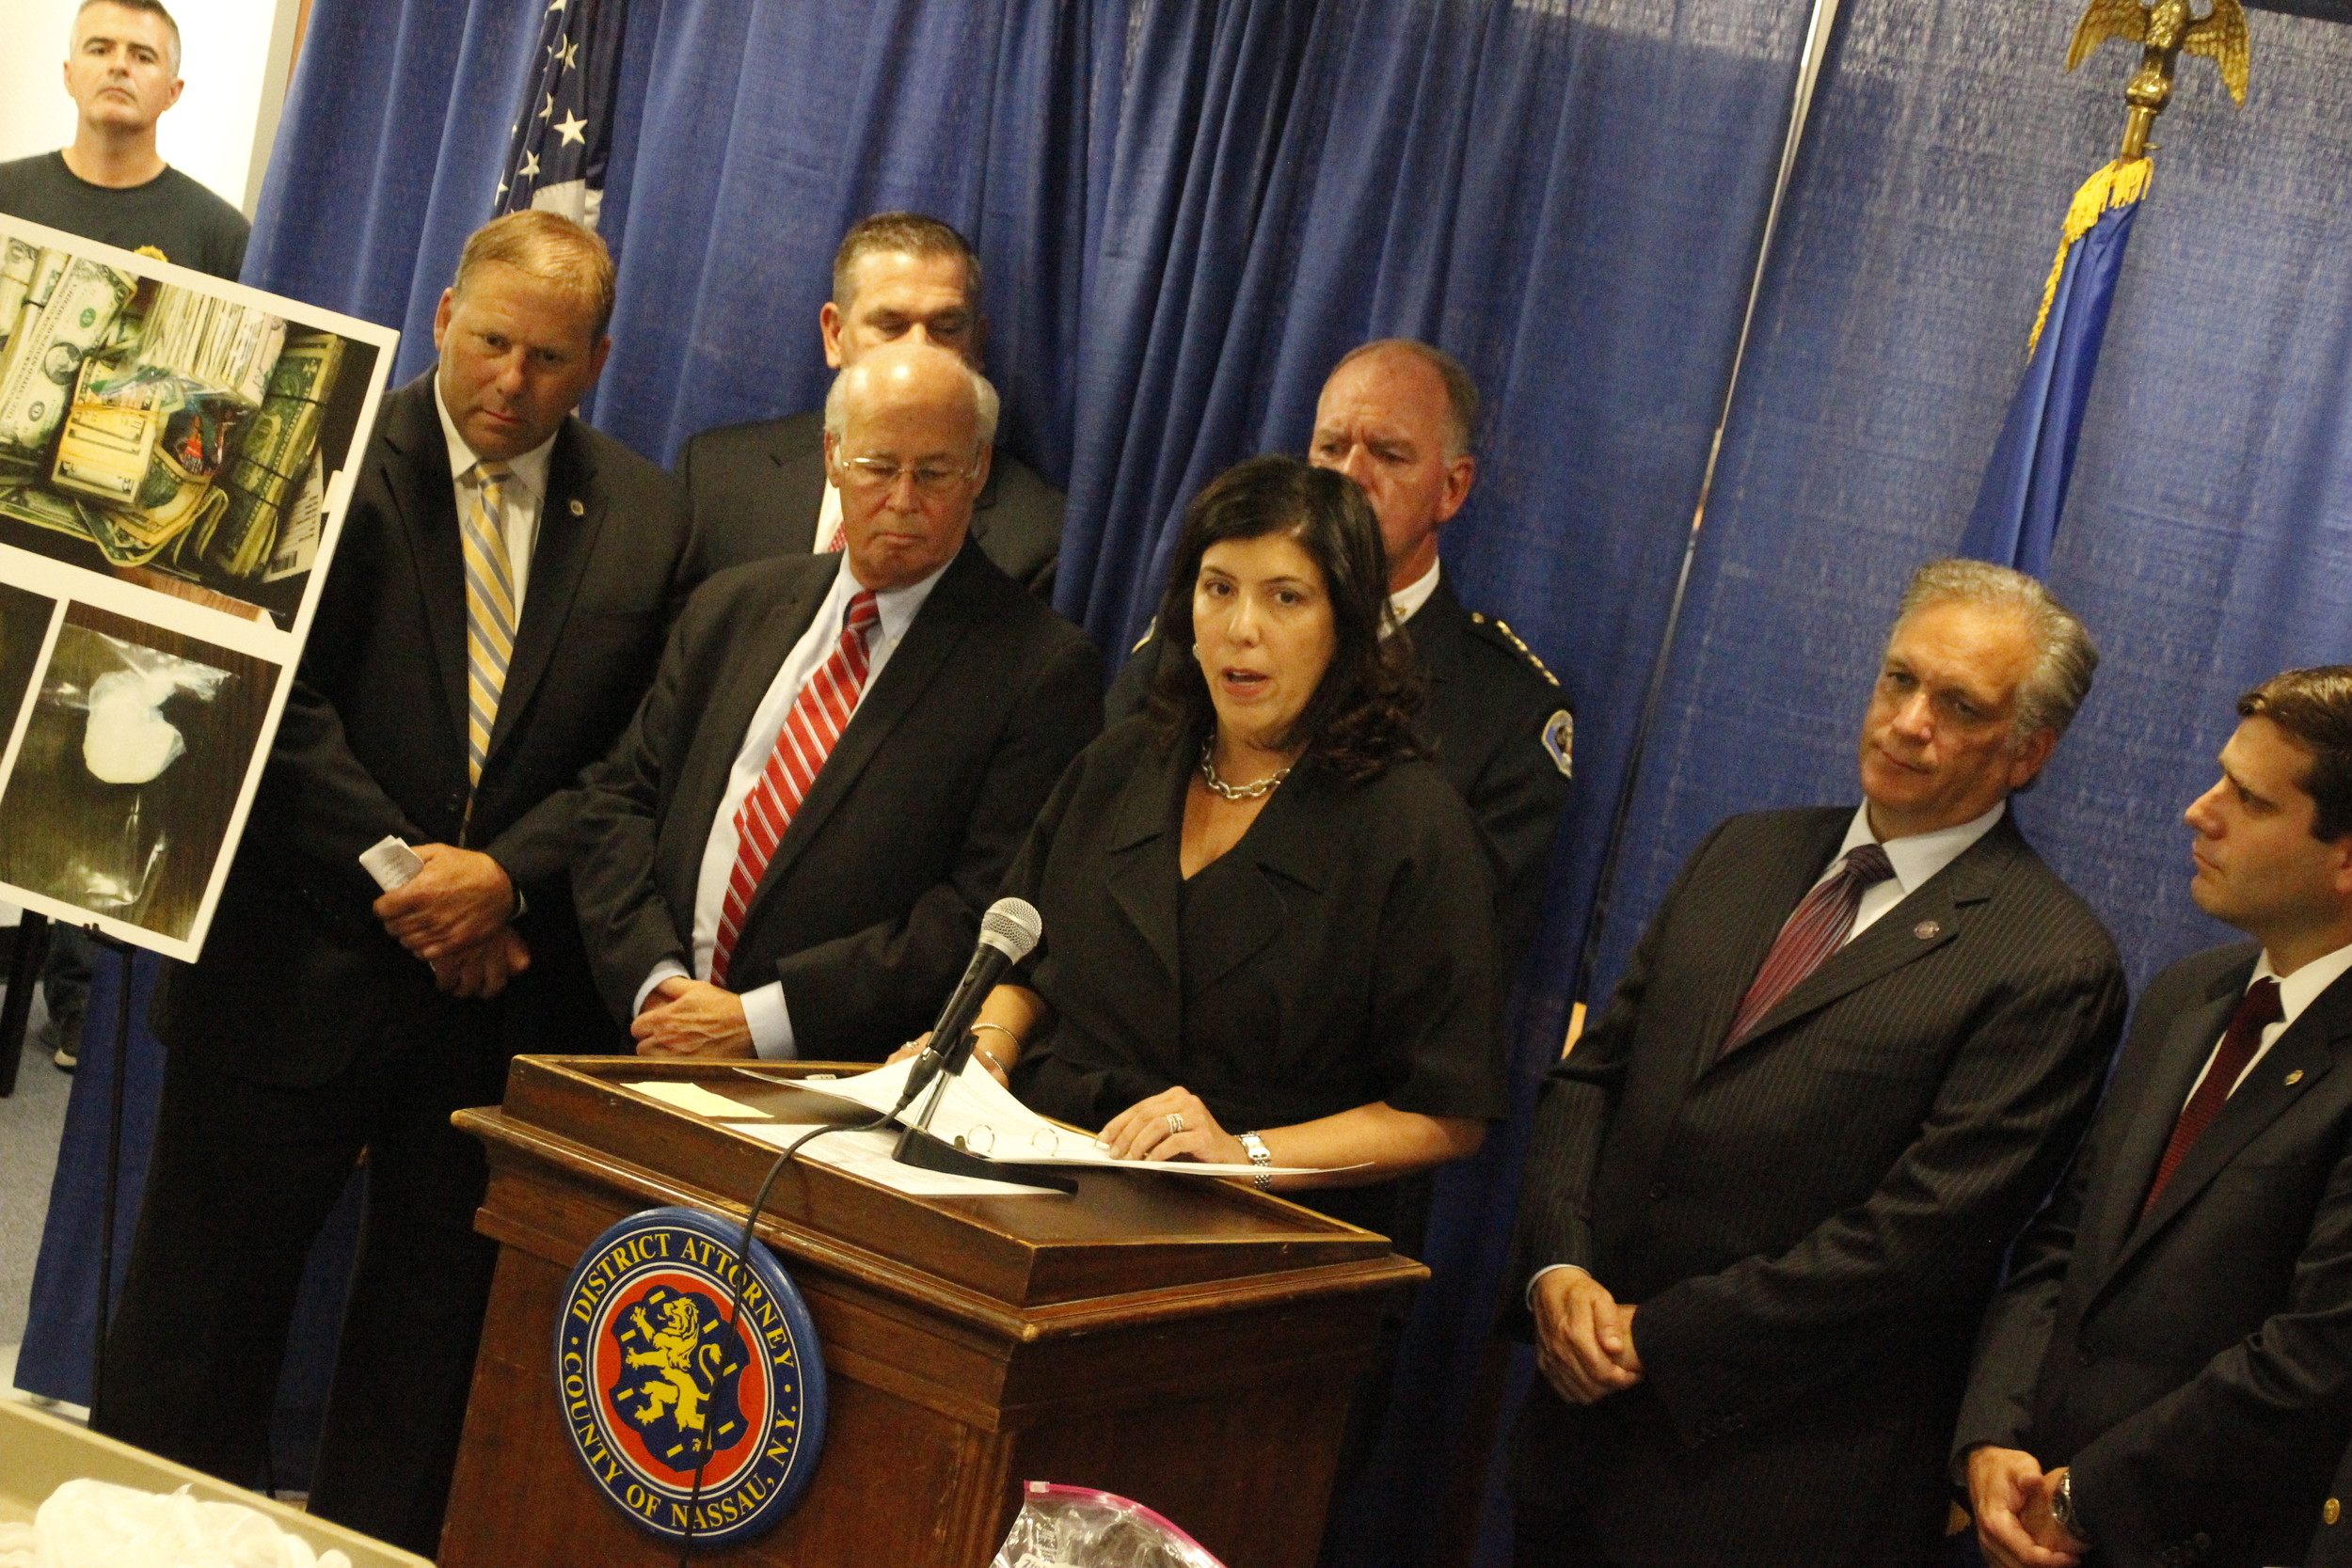 District Attorney Madeline Singas on July 14 announced that 31 people were indicted in one of Nassau County’s largest drug busts in history.